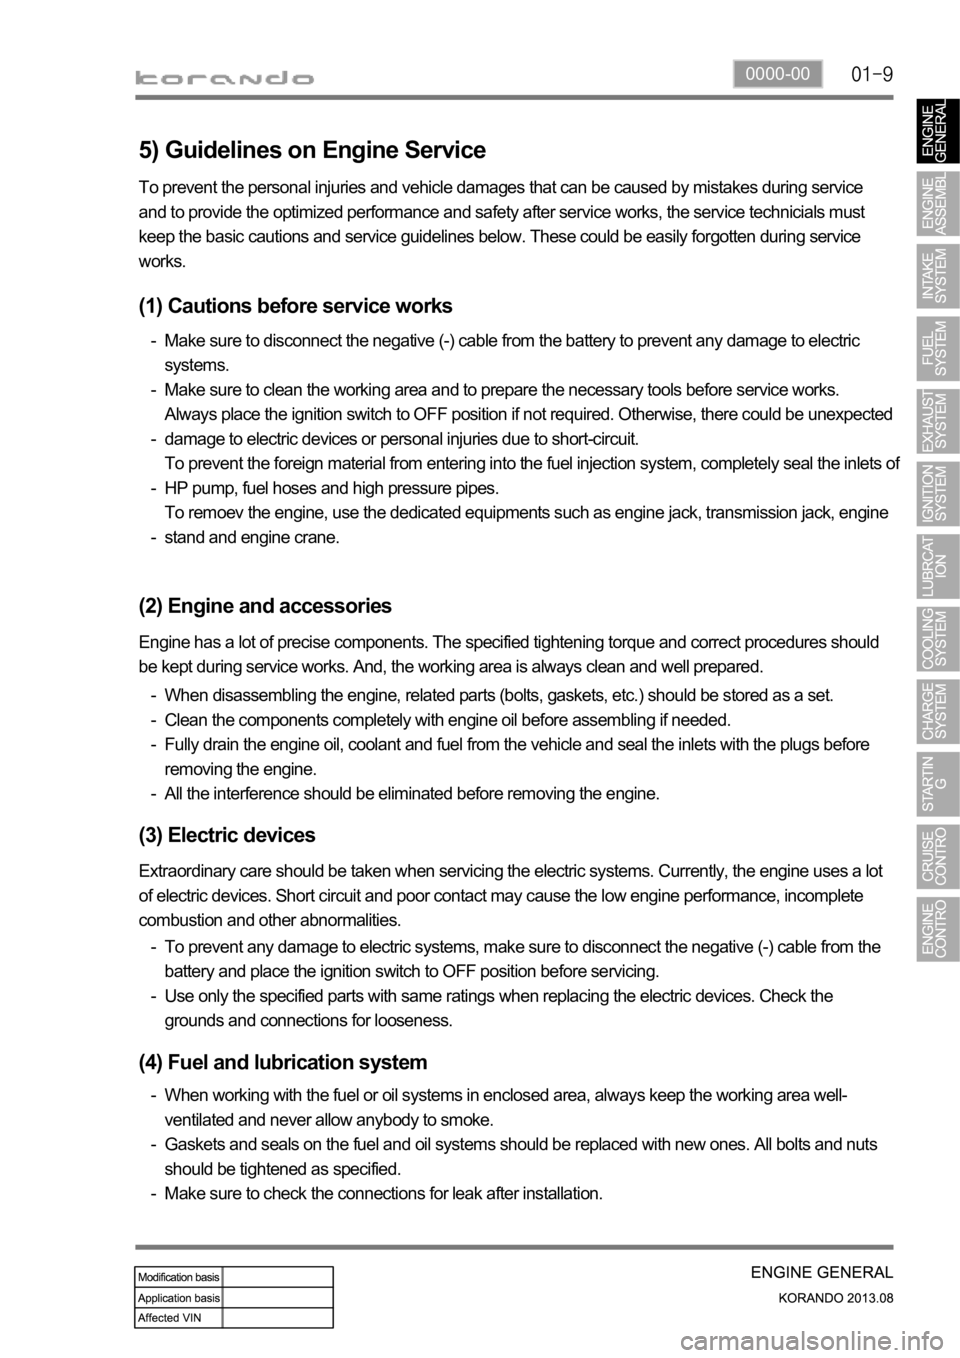 SSANGYONG KORANDO 2013  Service Manual 0000-00
5) Guidelines on Engine Service
(1) Cautions before service works
Make sure to disconnect the negative (-) cable from the battery to prevent any damage to electric 
systems.
Make sure to clean